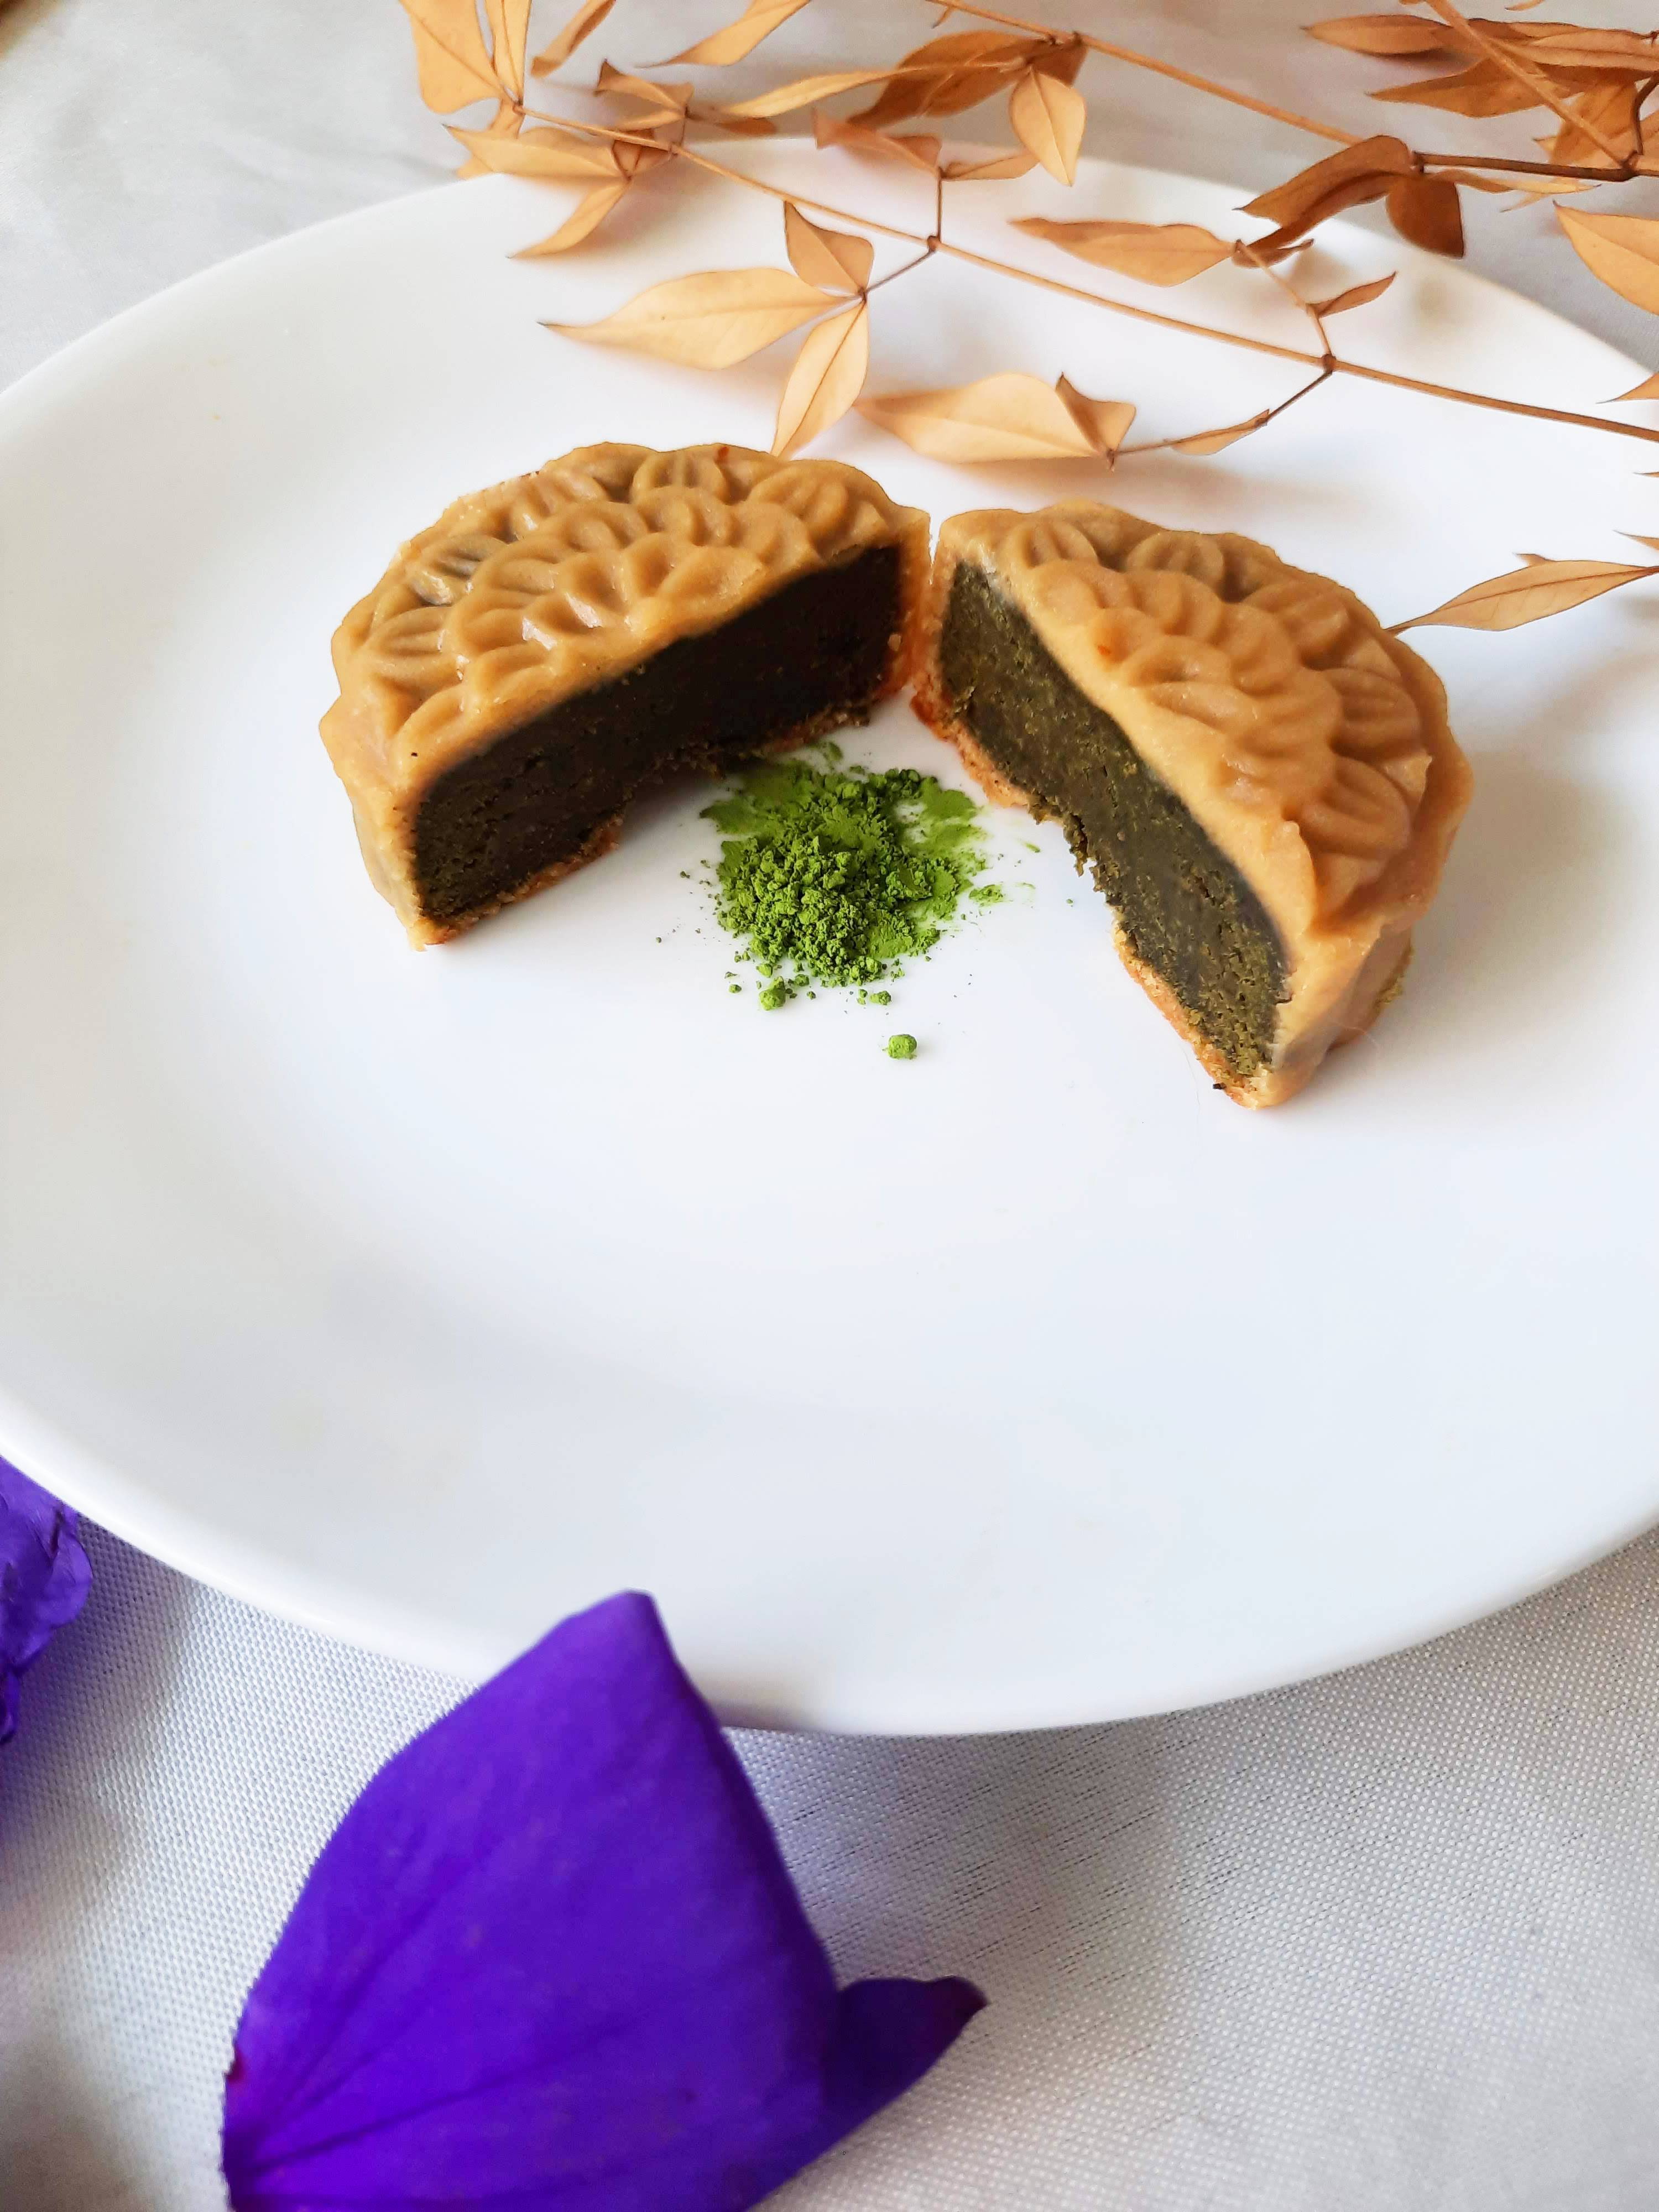 Vegan twist to mooncakes in Green Common gift set - Viable Earth